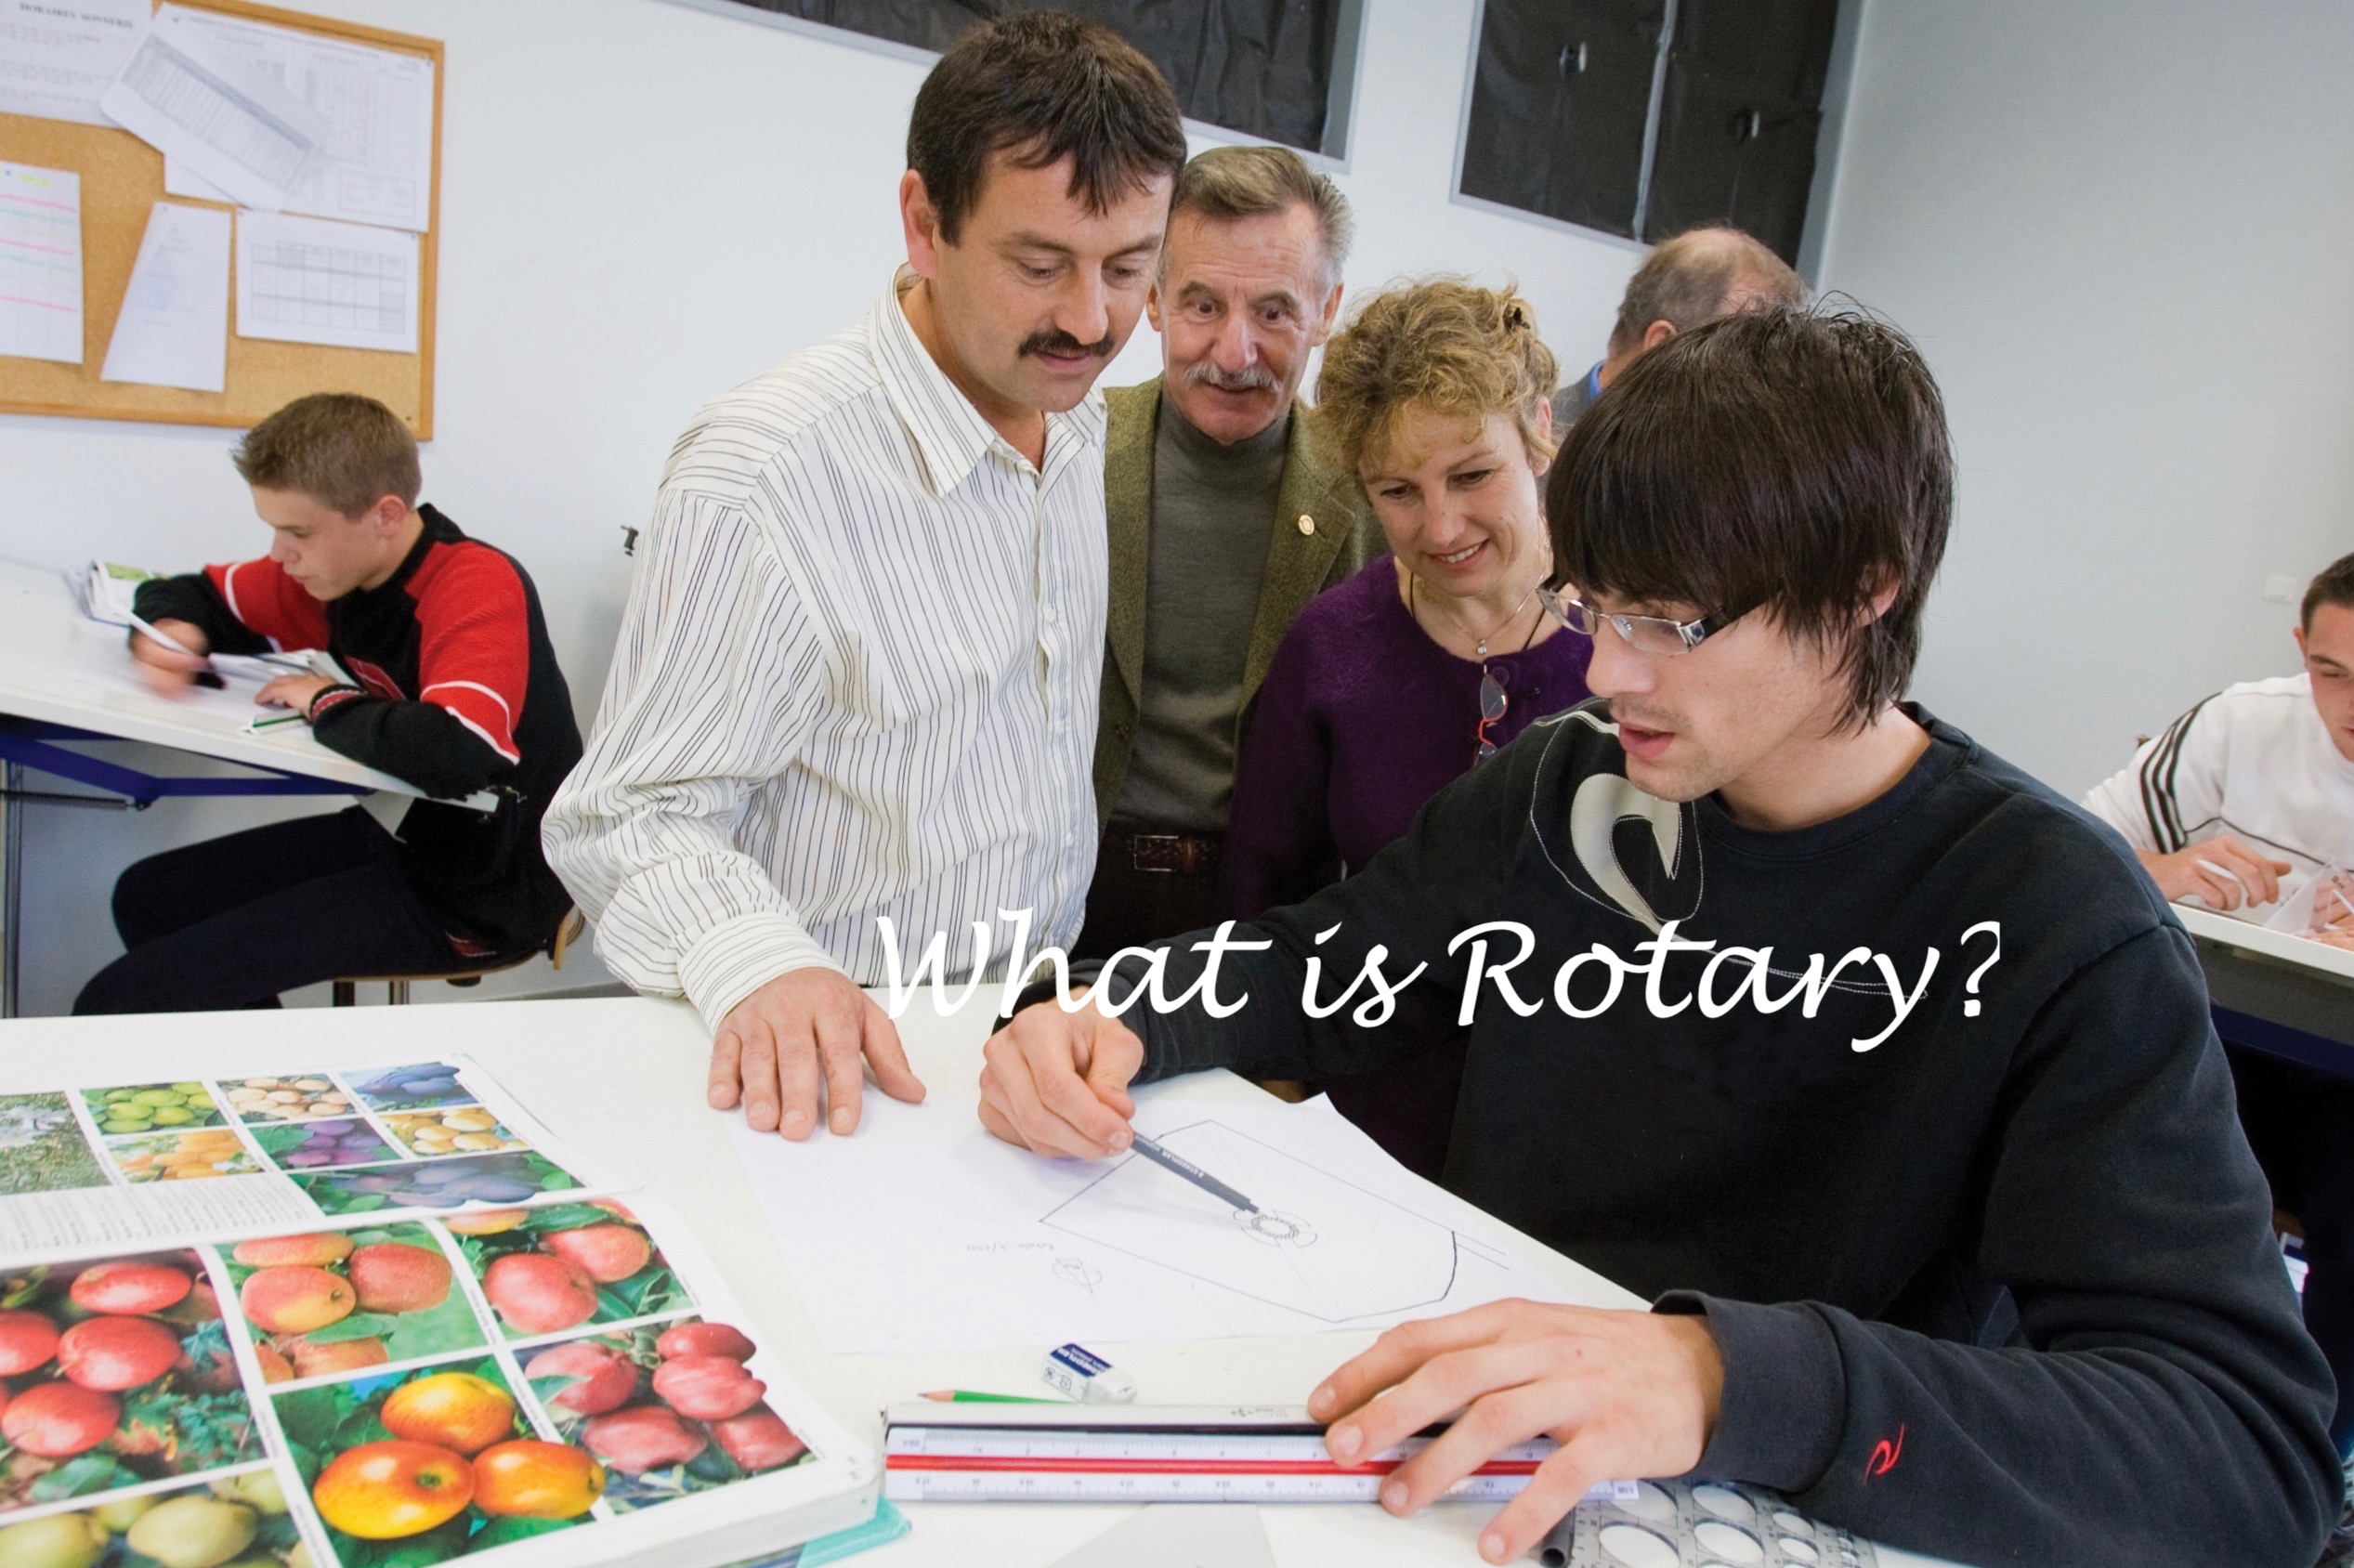 Volunteering Work with Rotary Changes Lives!